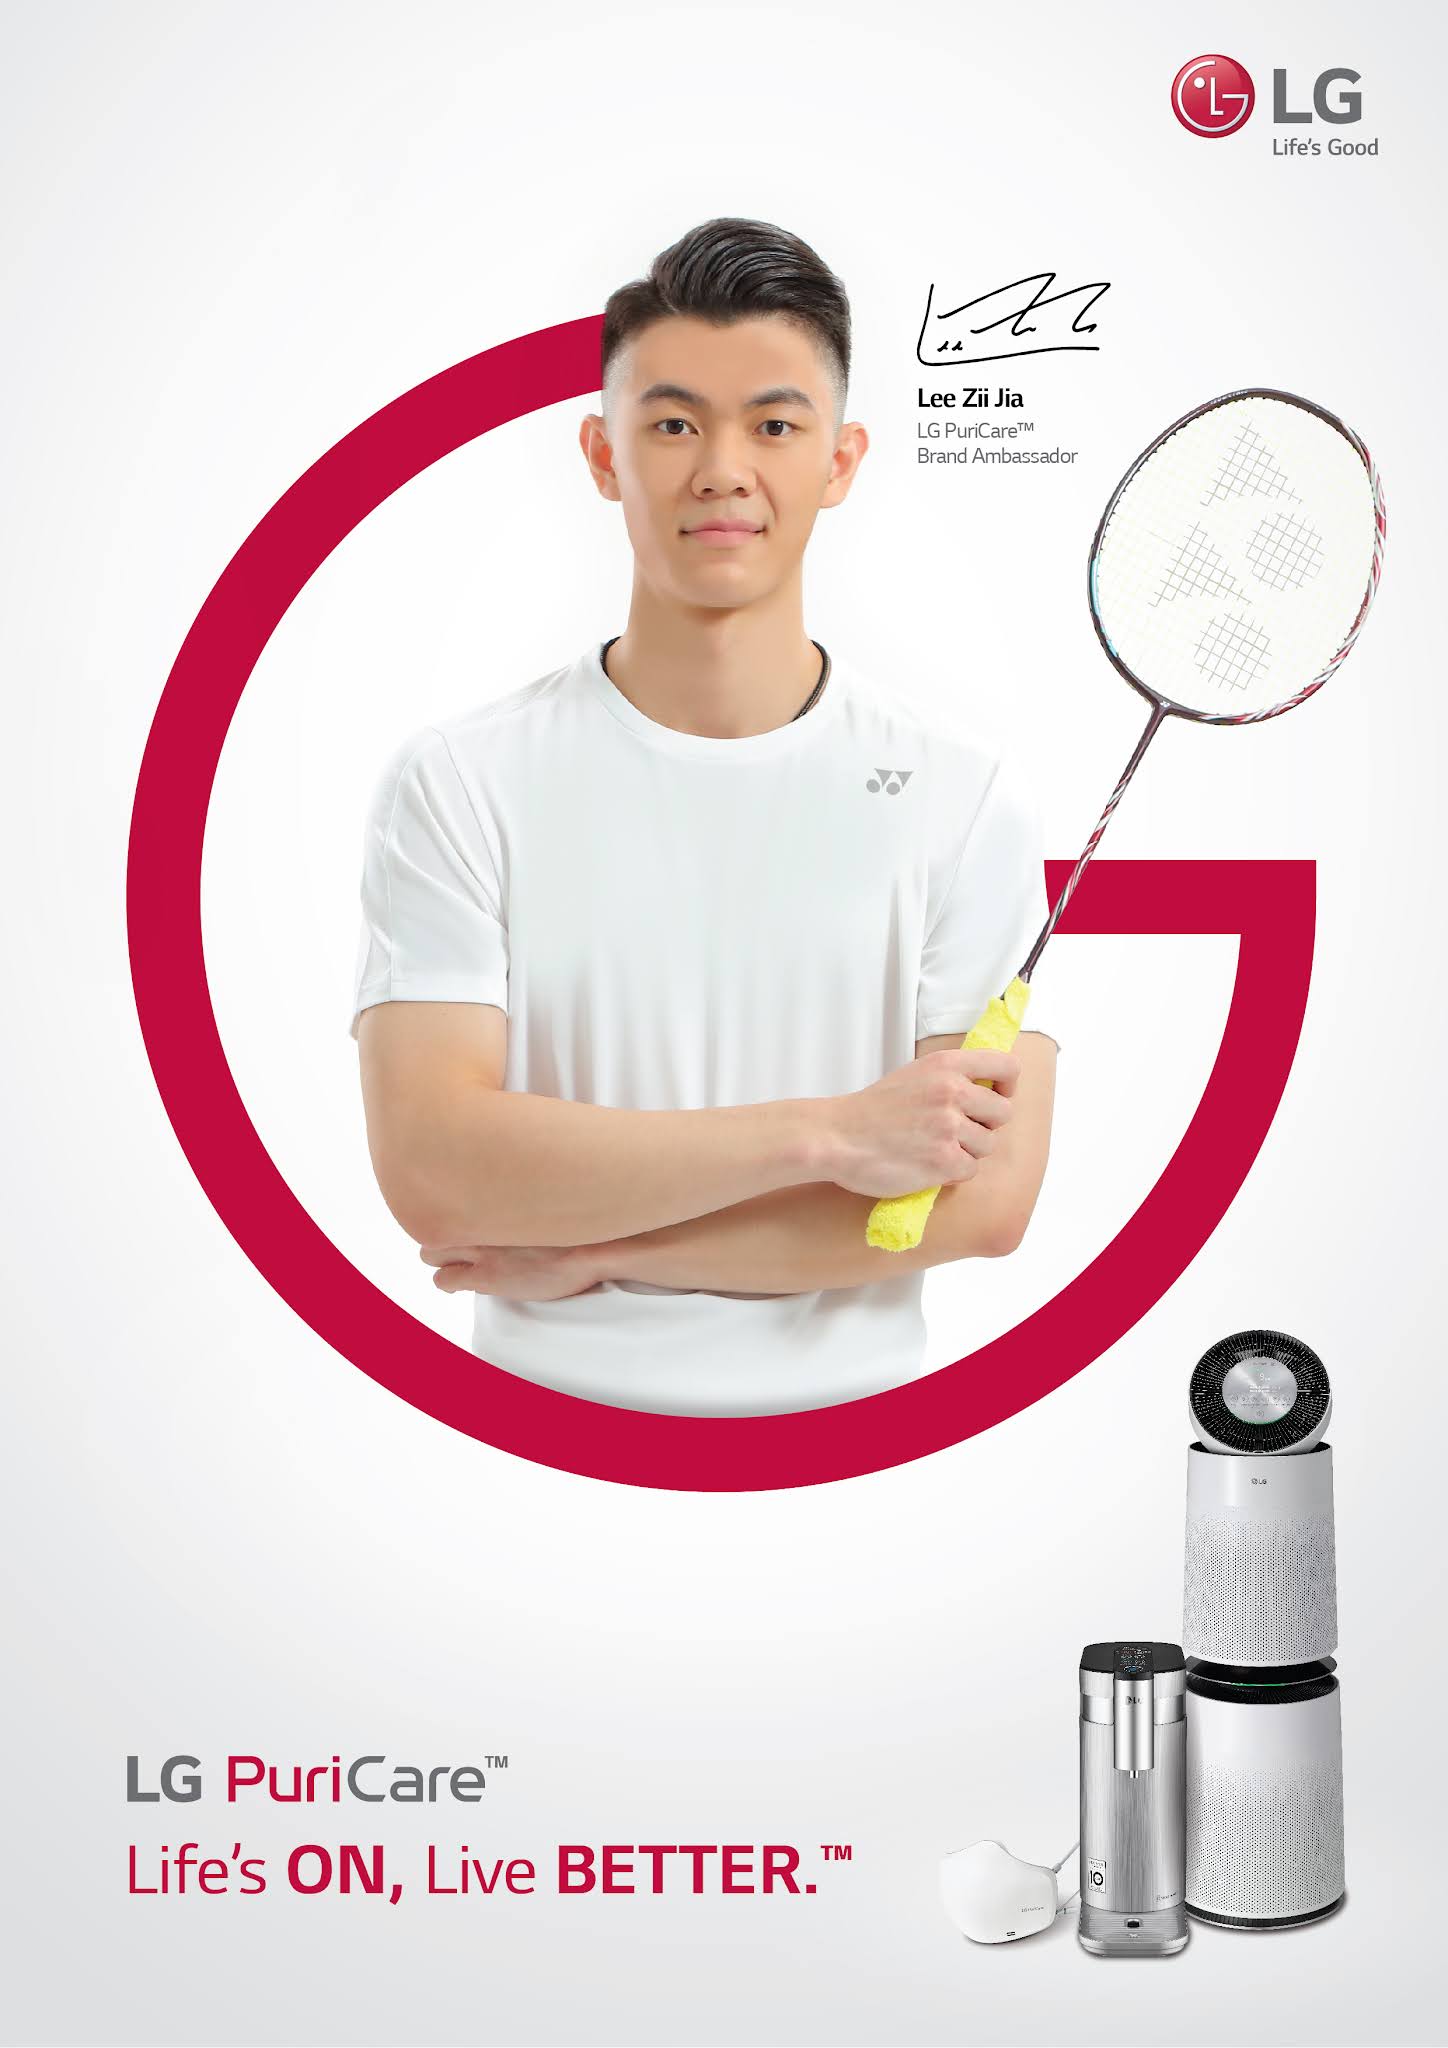 Lee Zii Jia is the Brand Ambassador for LG PuriCare™ of LG Electronics